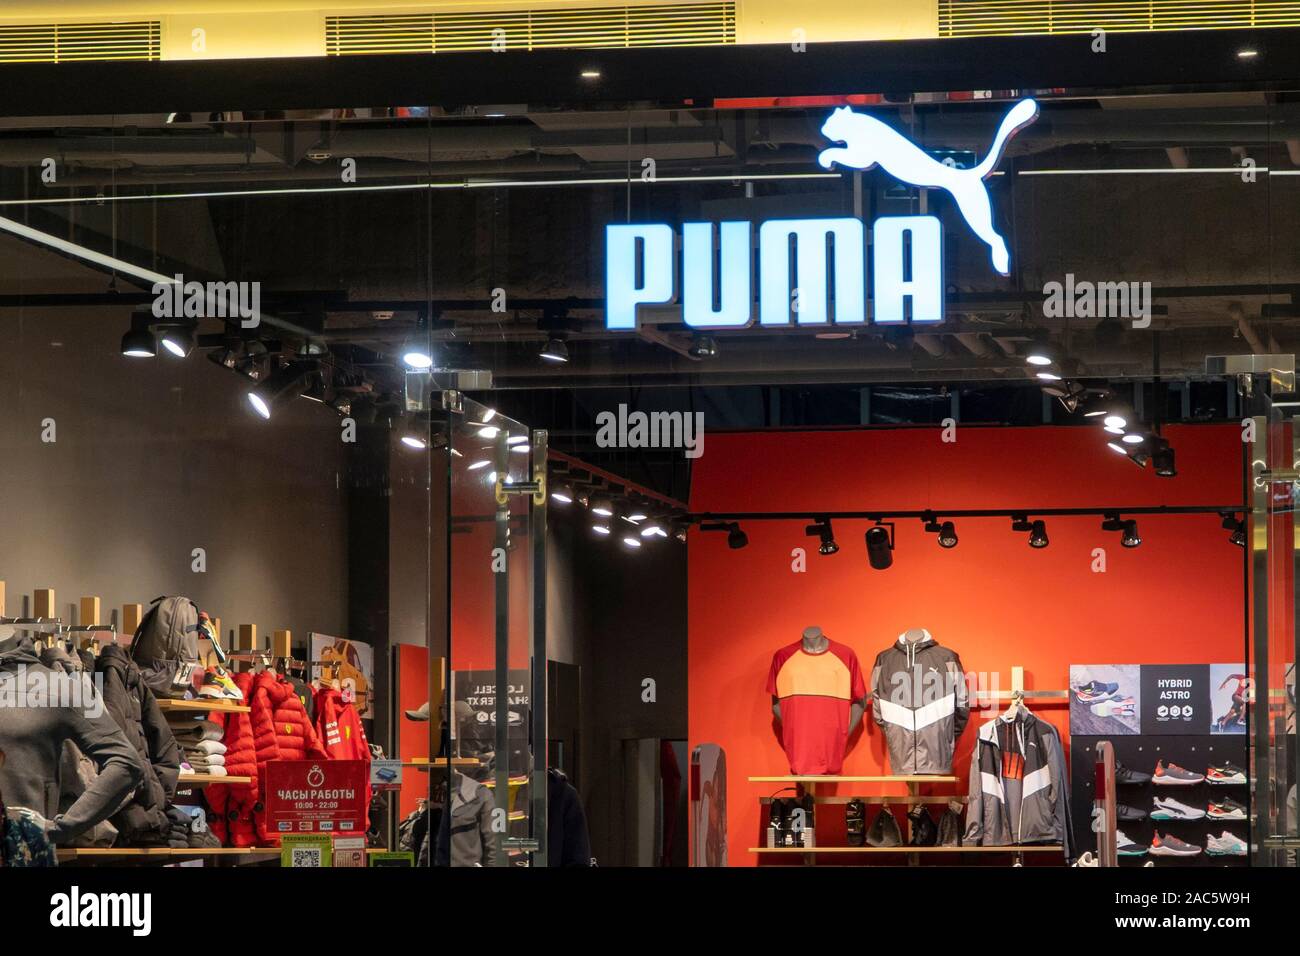 Page 2 - Puma Shoes High Resolution Stock Photography and Images - Alamy